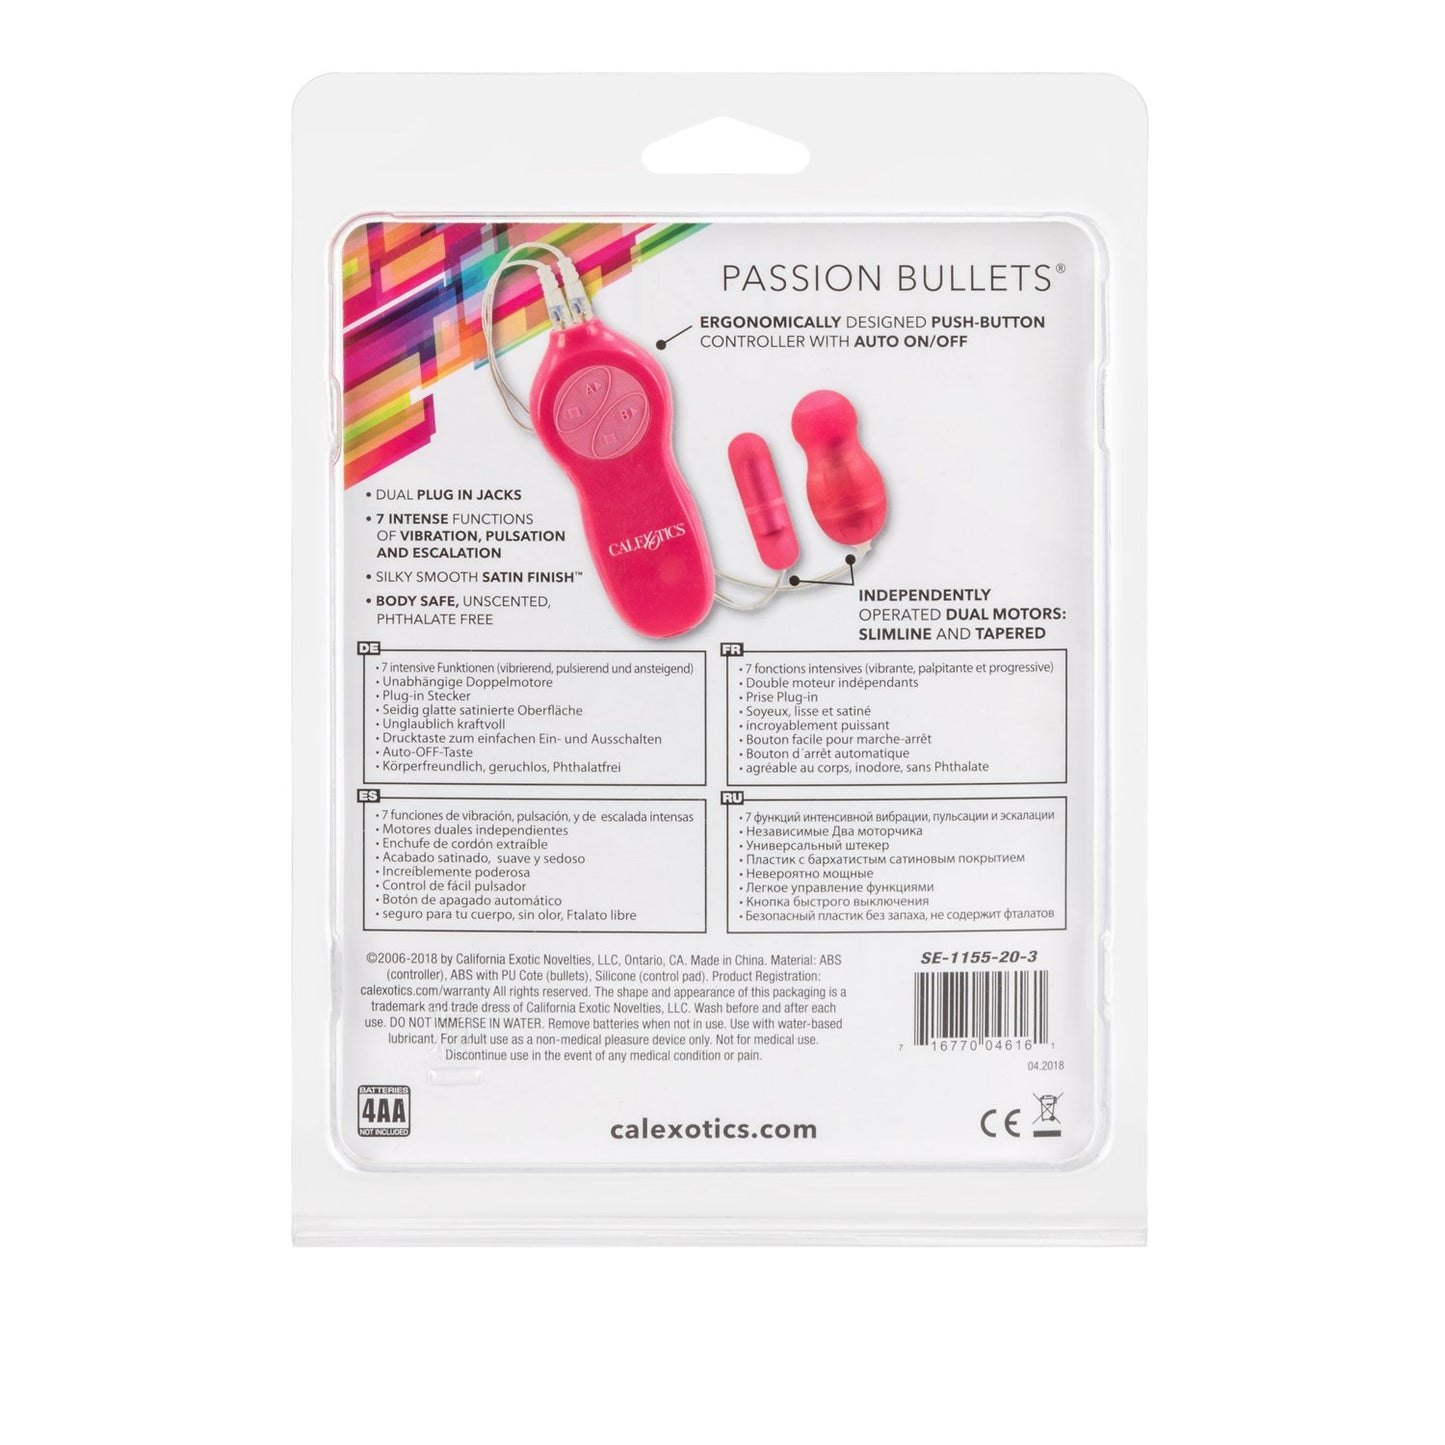 Passion Bullets